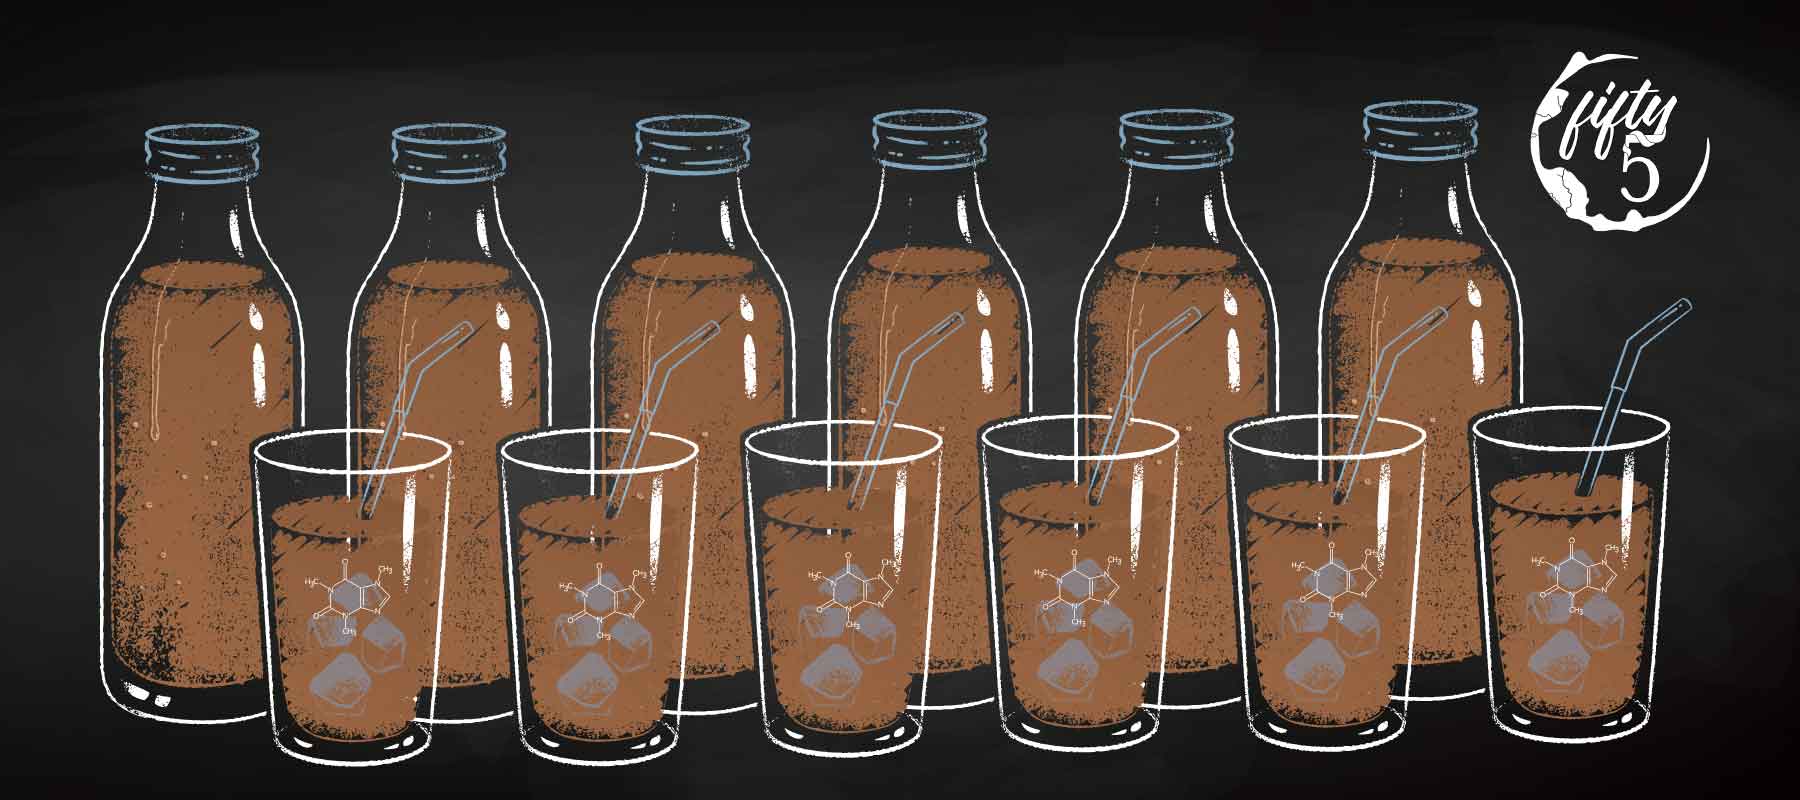 How our cold brew coffee caffeine content compares